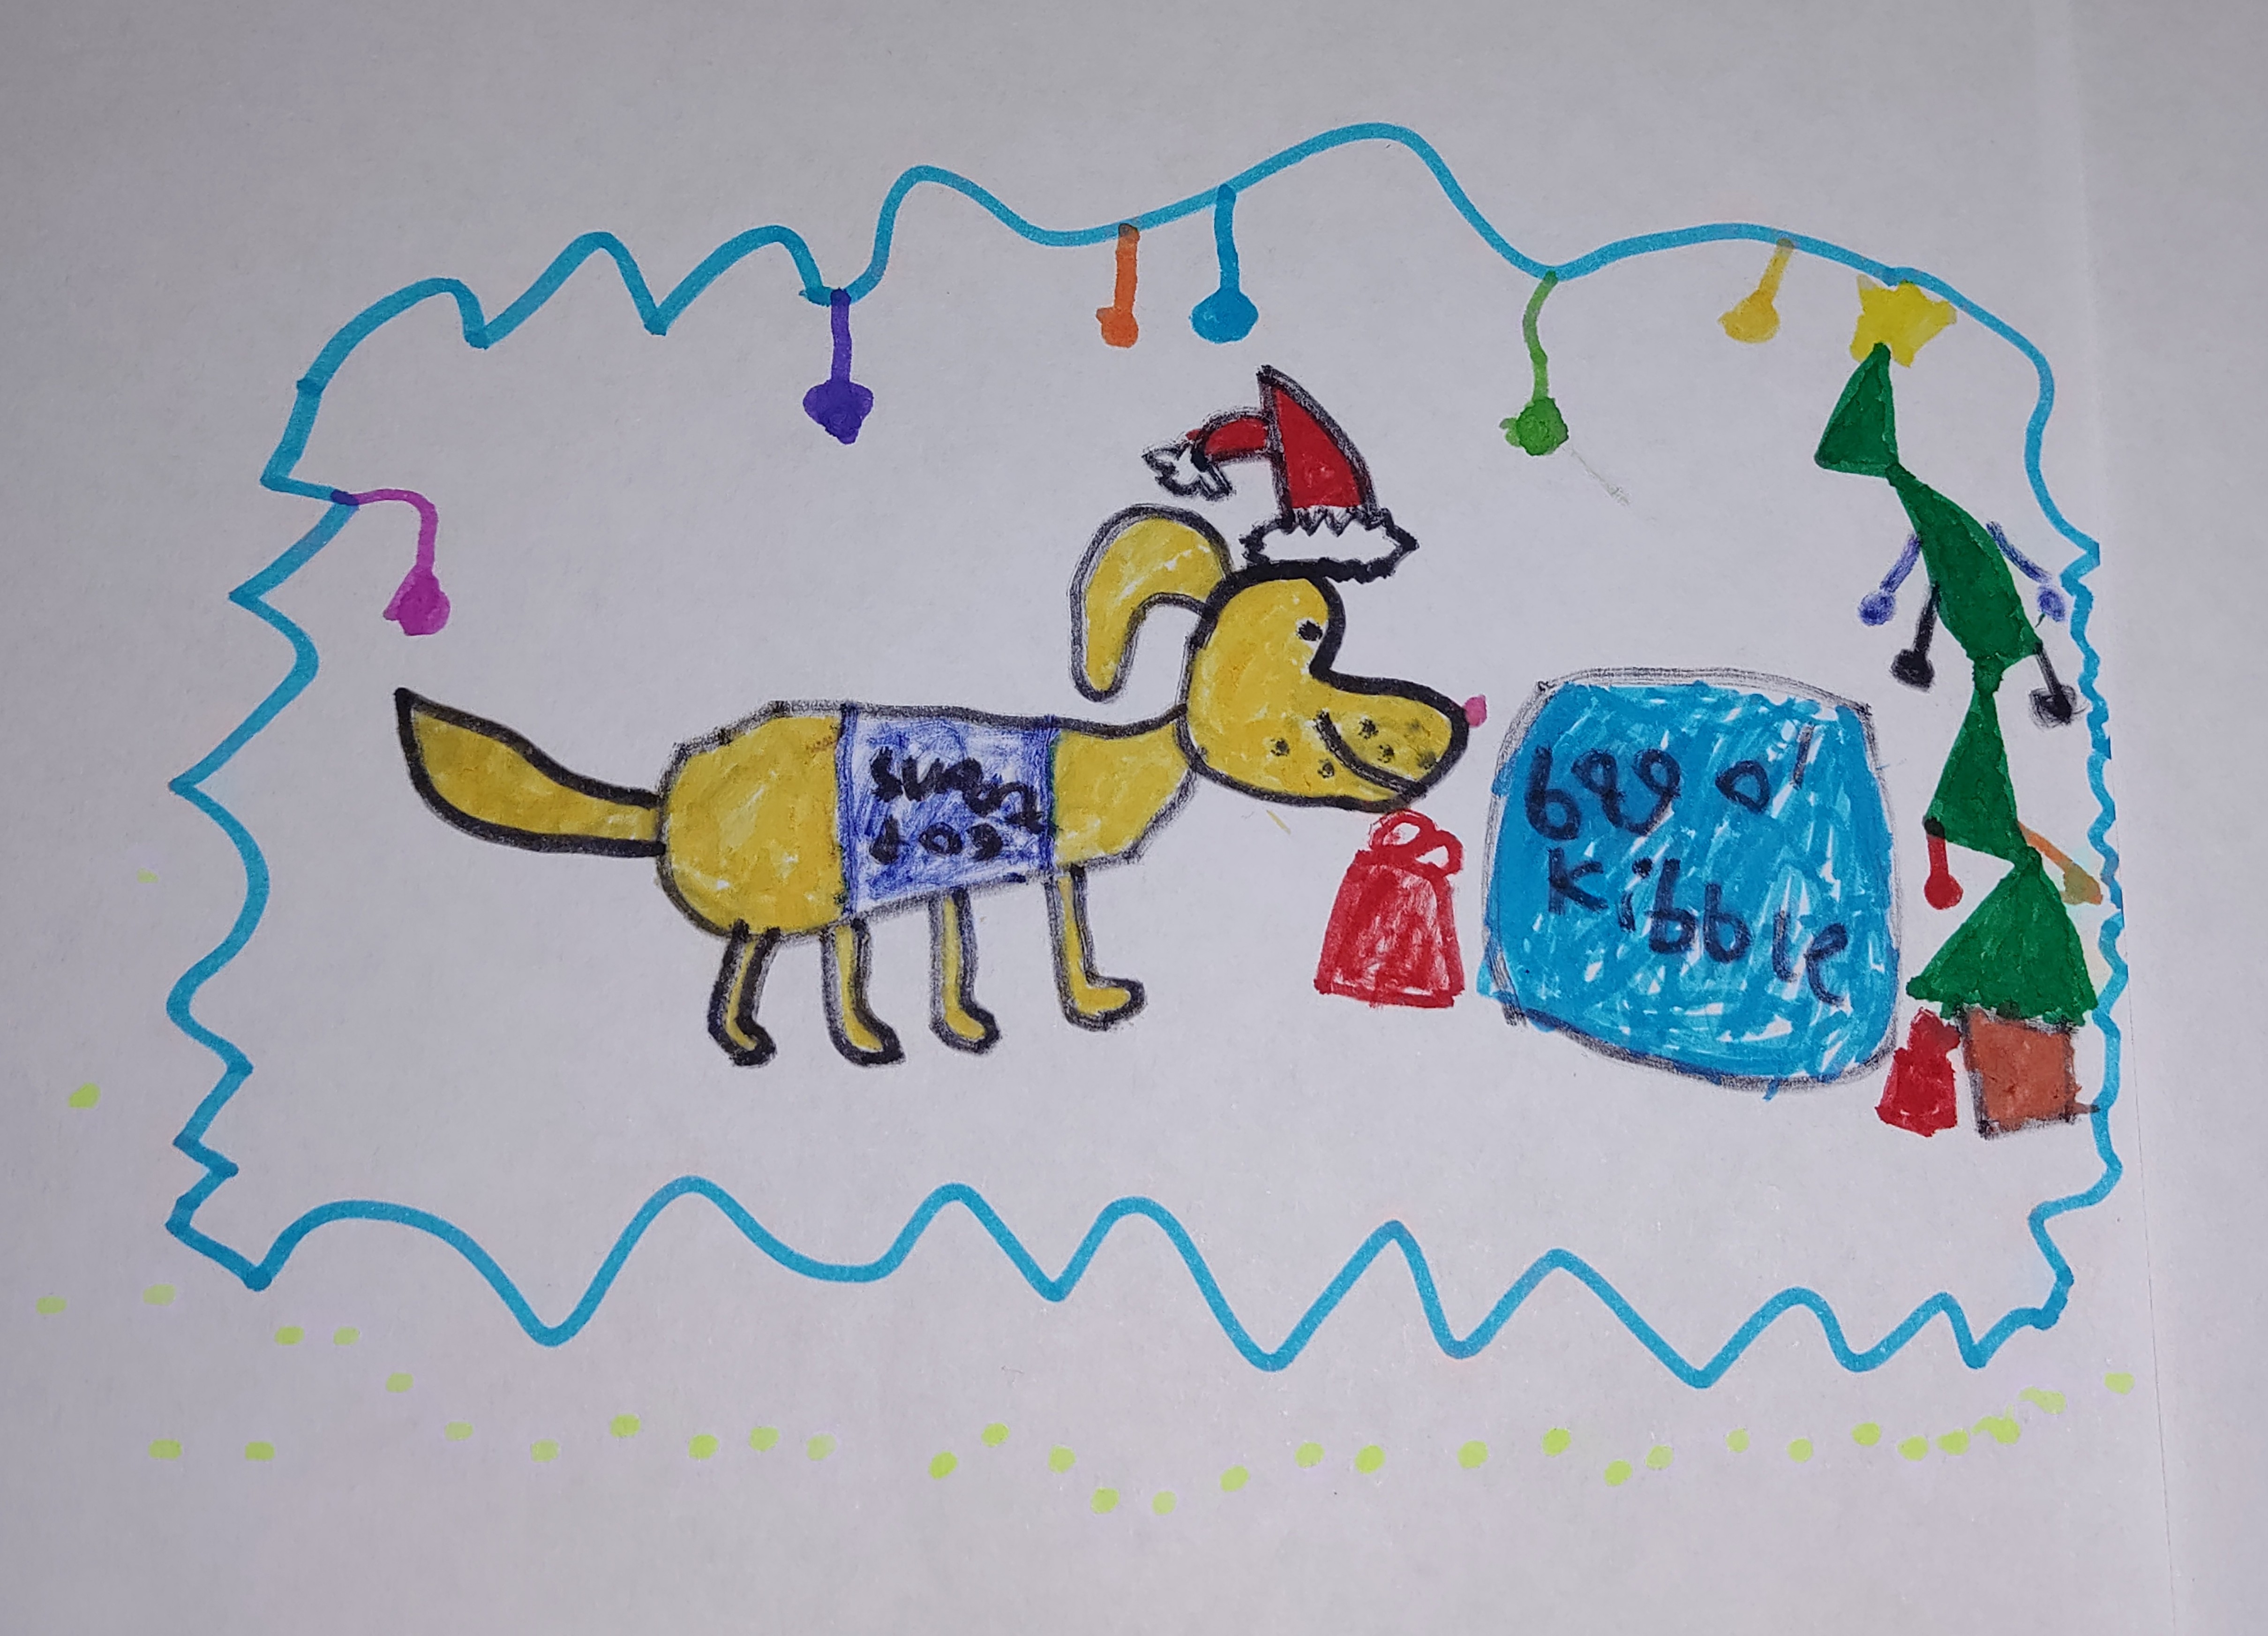 Thomas Cross' Christmas card entry. It features Thomas' dog in a Christmas hat with its present: a bag of kibble.